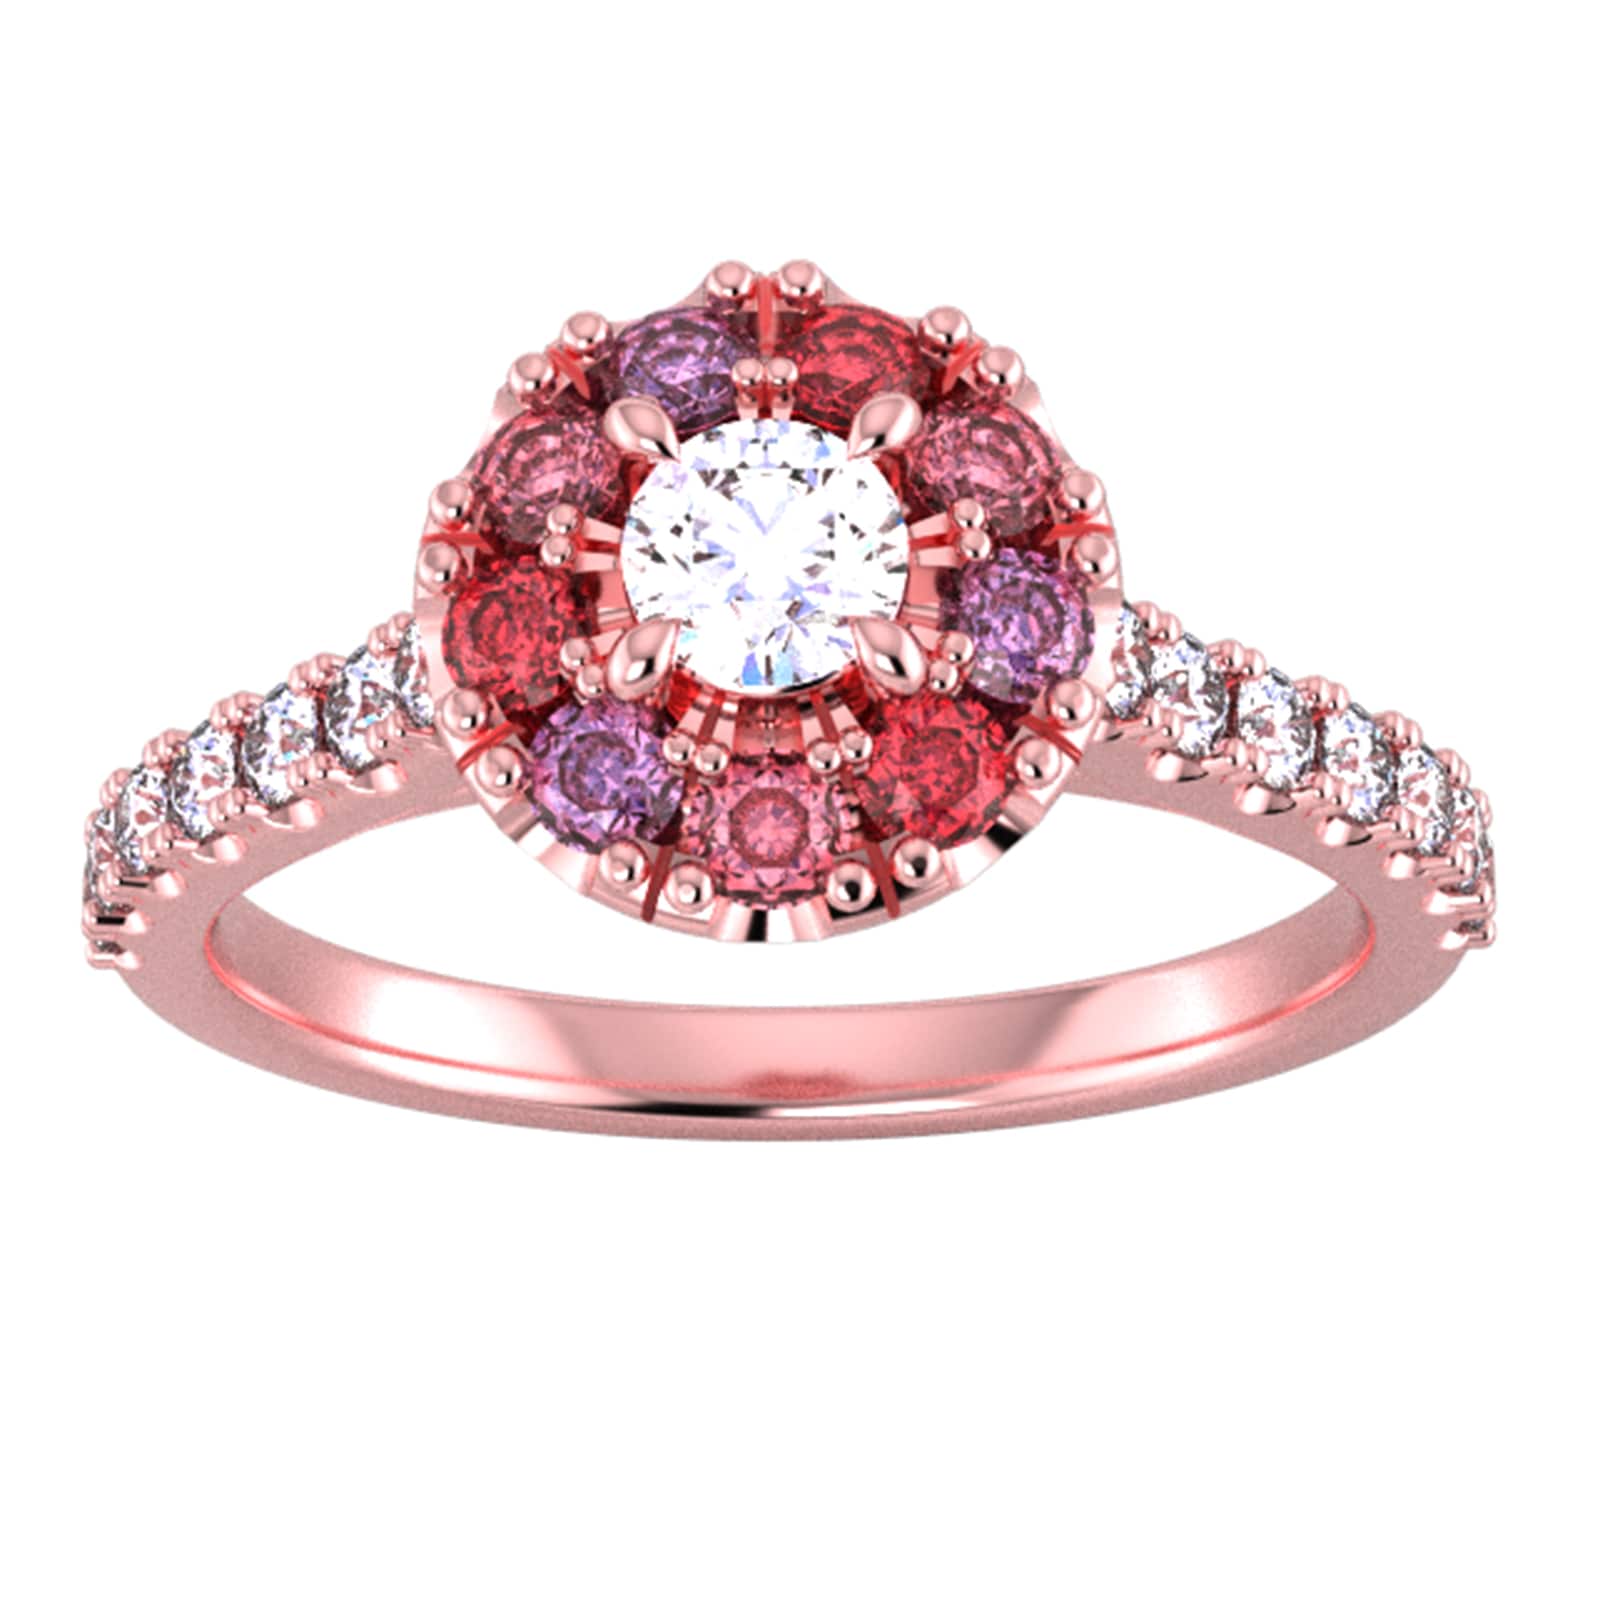 18ct Rose Gold Diamond & Red, Pink, Purple Sapphire Halo Ring - Ring Size Y